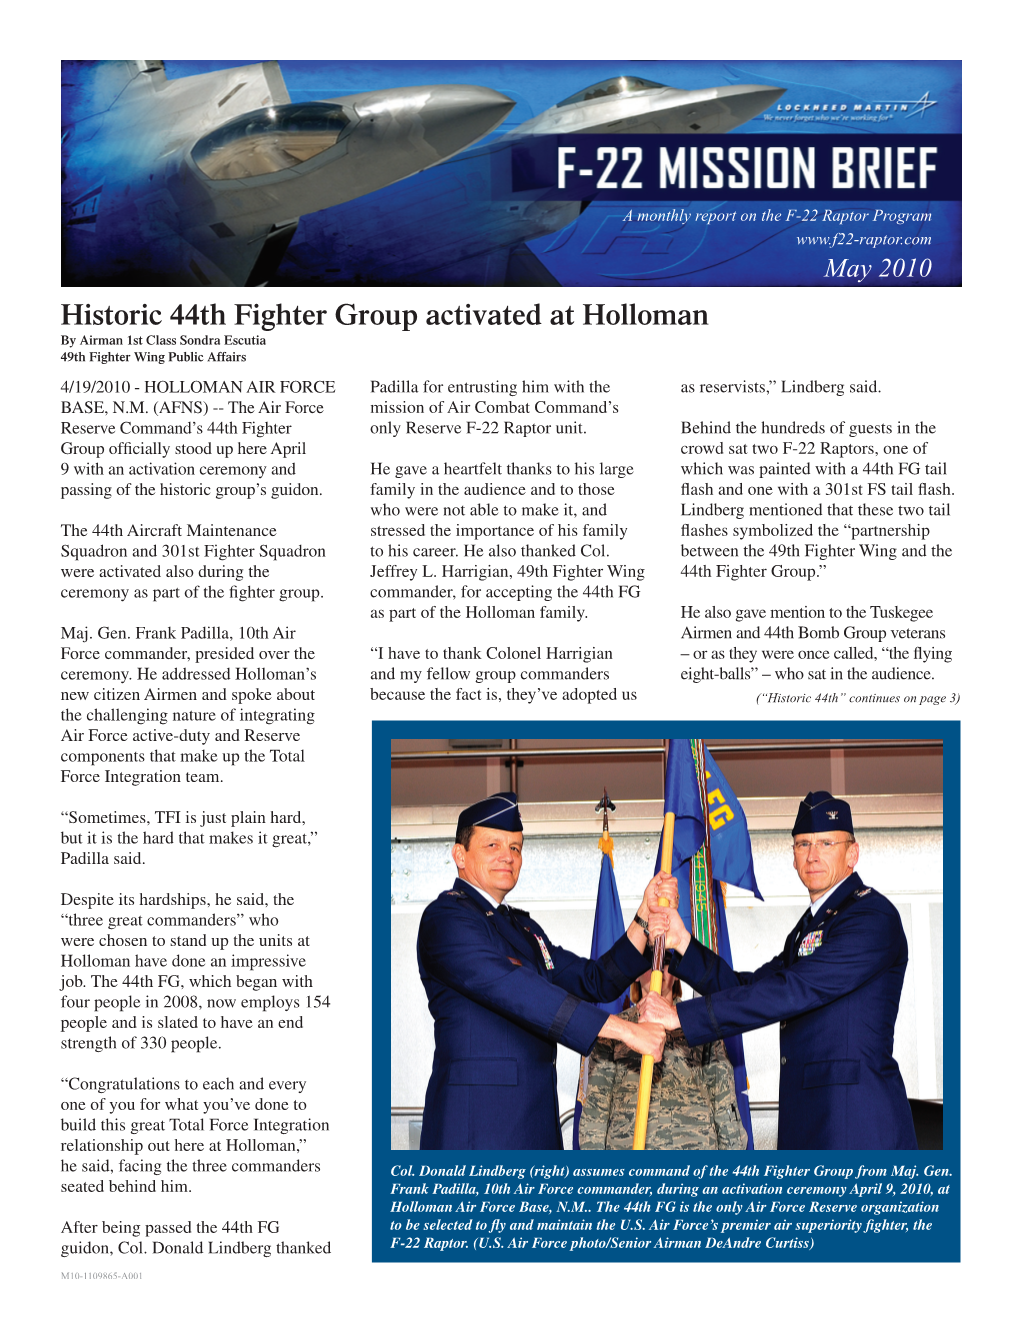 Historic 44Th Fighter Group Activated at Holloman